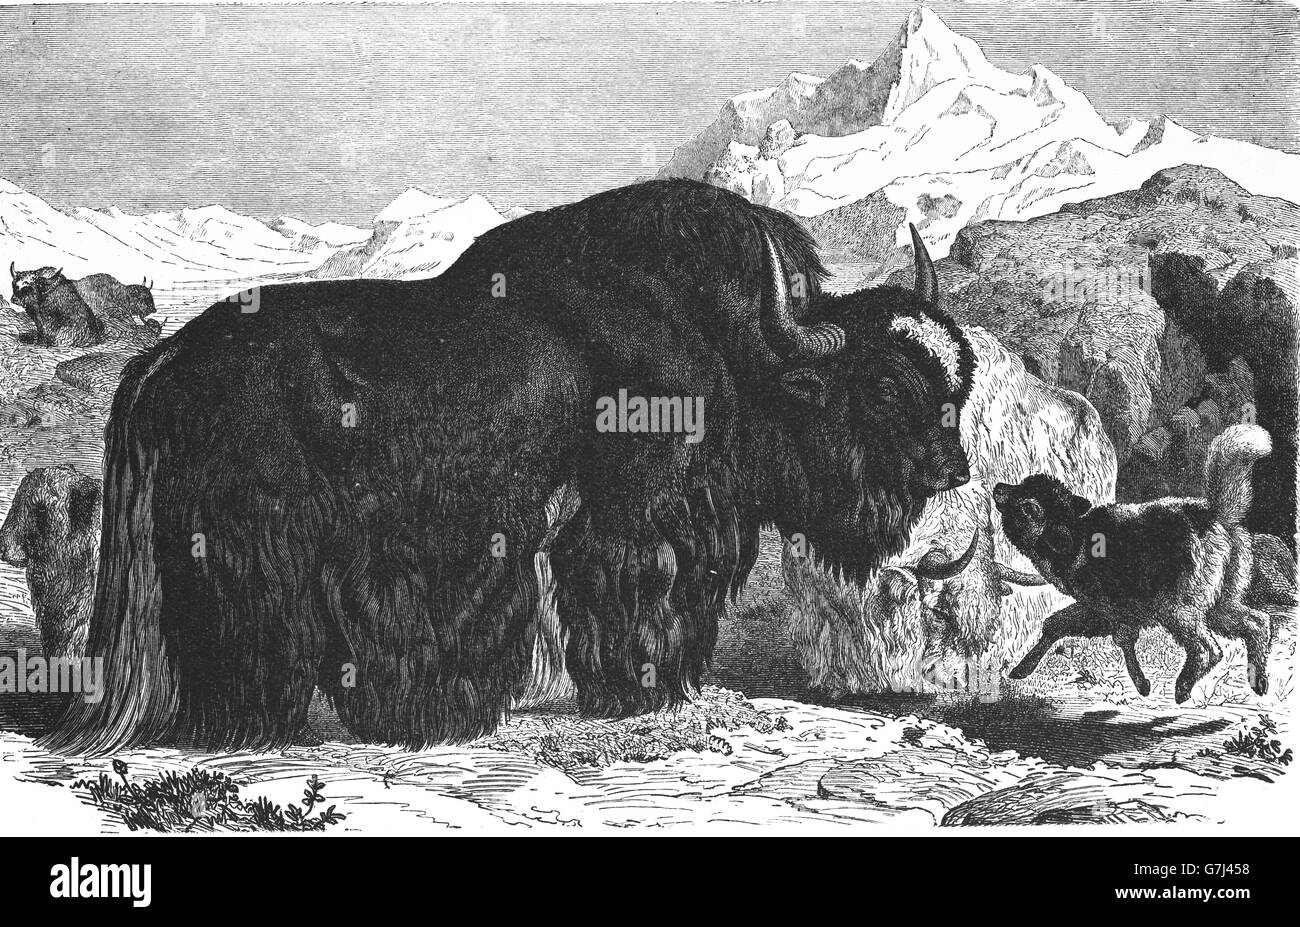 Yak, Bos grunniens, Bos mutus, illustration from book dated 1904 Stock Photo